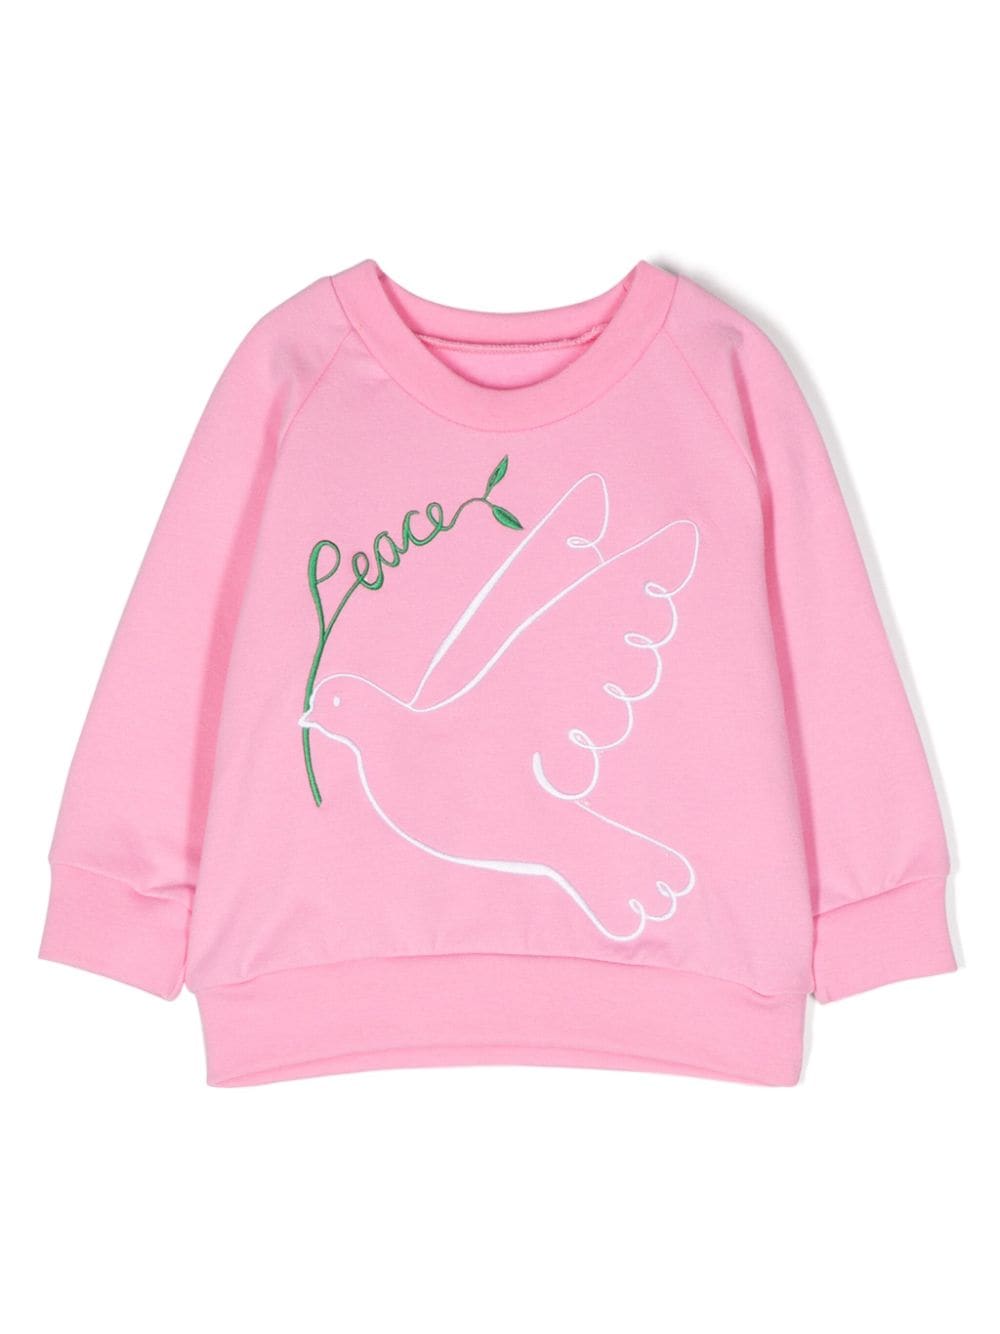 WAUW CAPOW by BANGBANG Peace Out organic cotton sweatshirt - Pink von WAUW CAPOW by BANGBANG